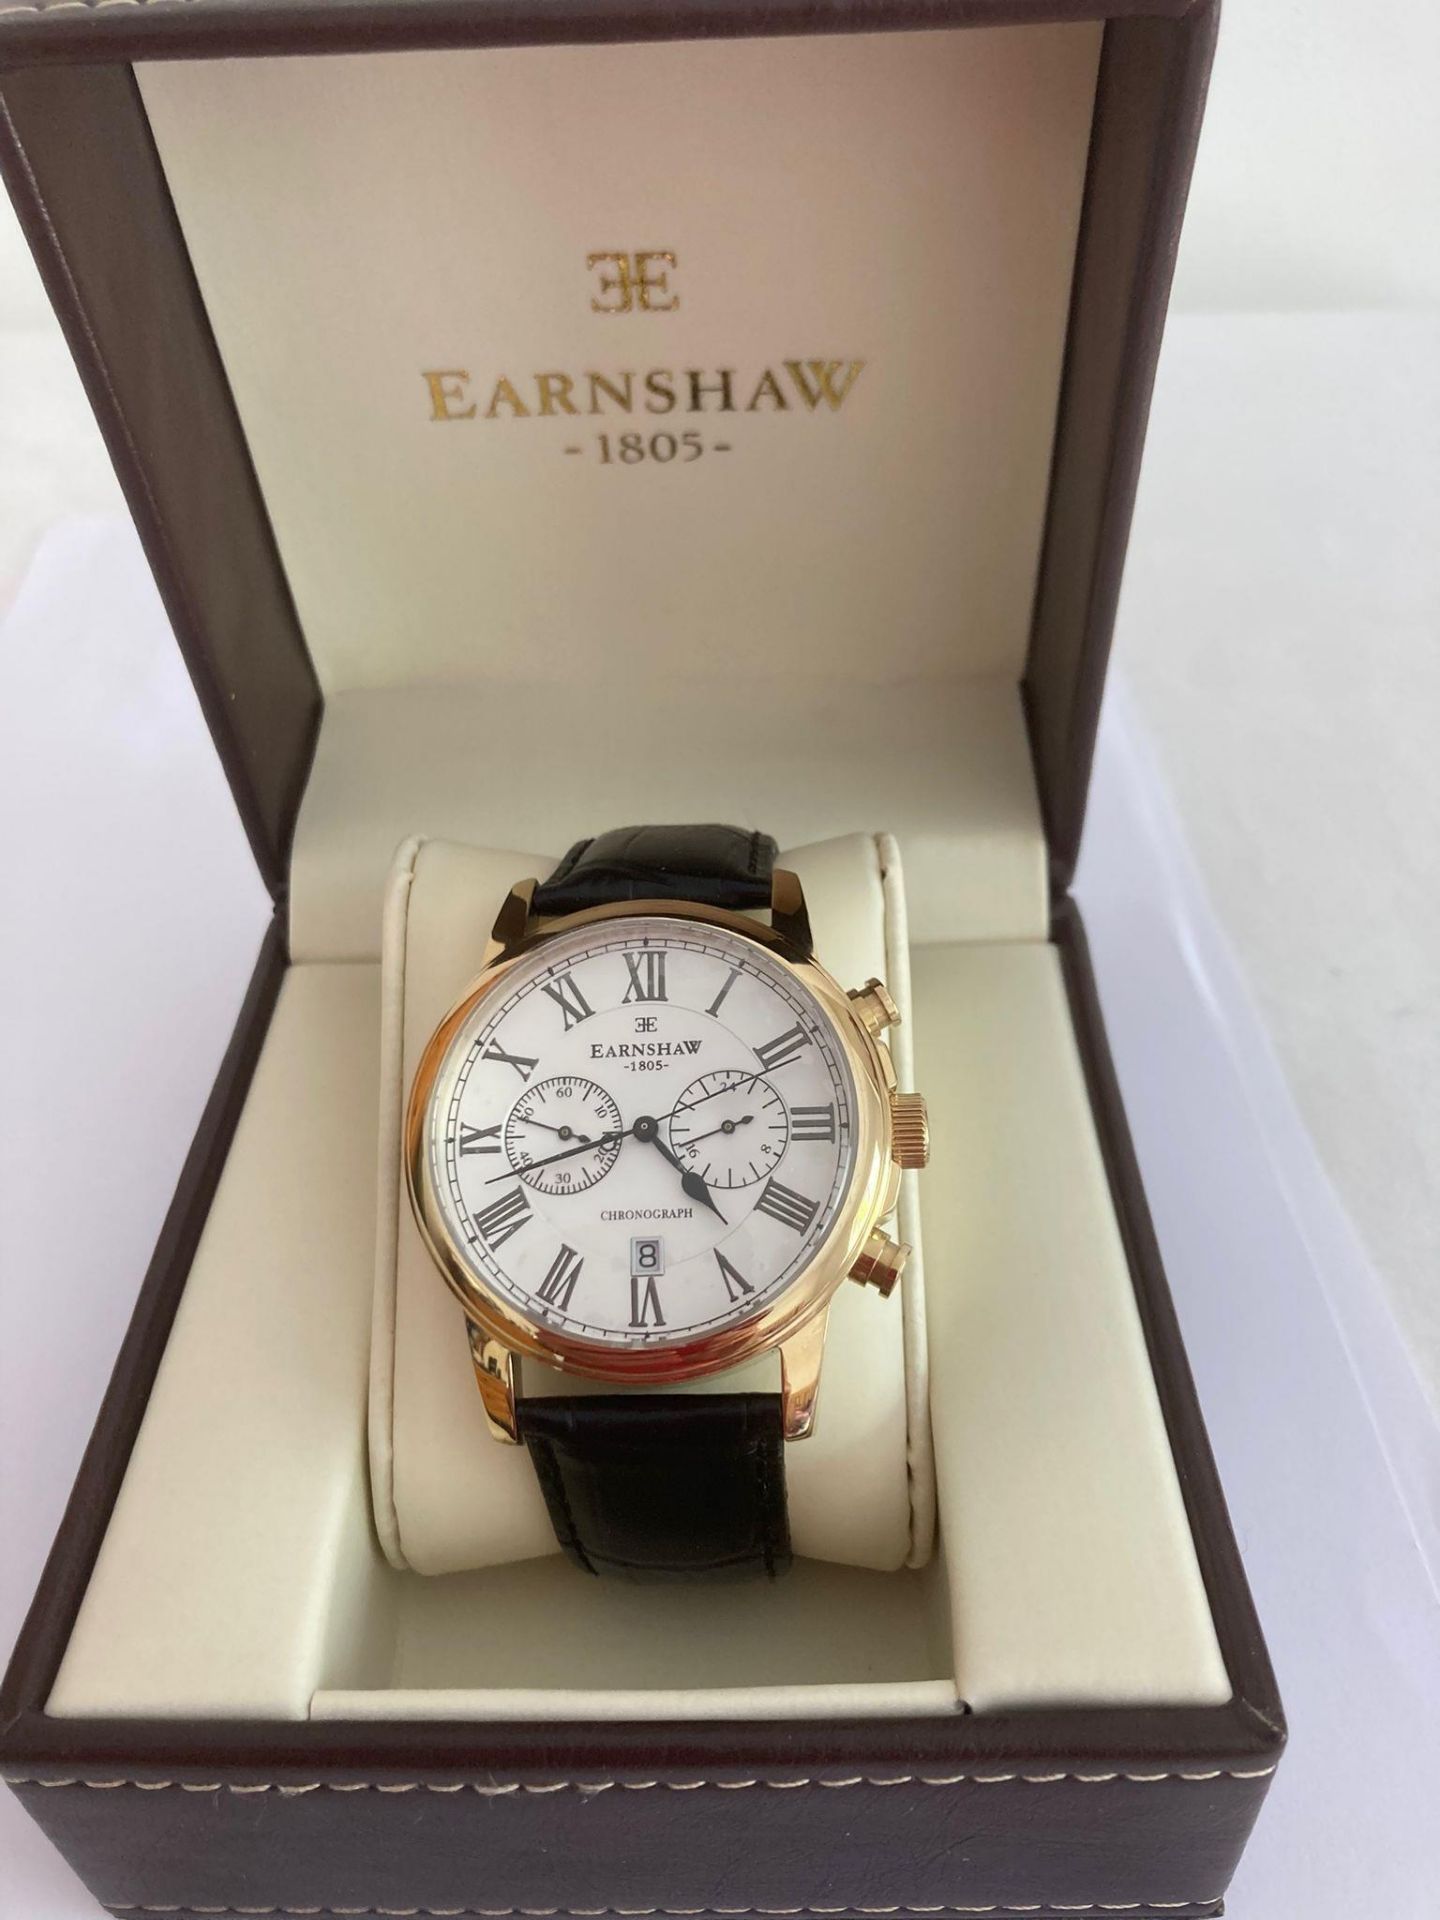 Gentleman's EARNSHAW QUARTZ CHRONOGRAPH Model WB120587. Finished in Gold Tone with multi dials. - Image 8 of 8